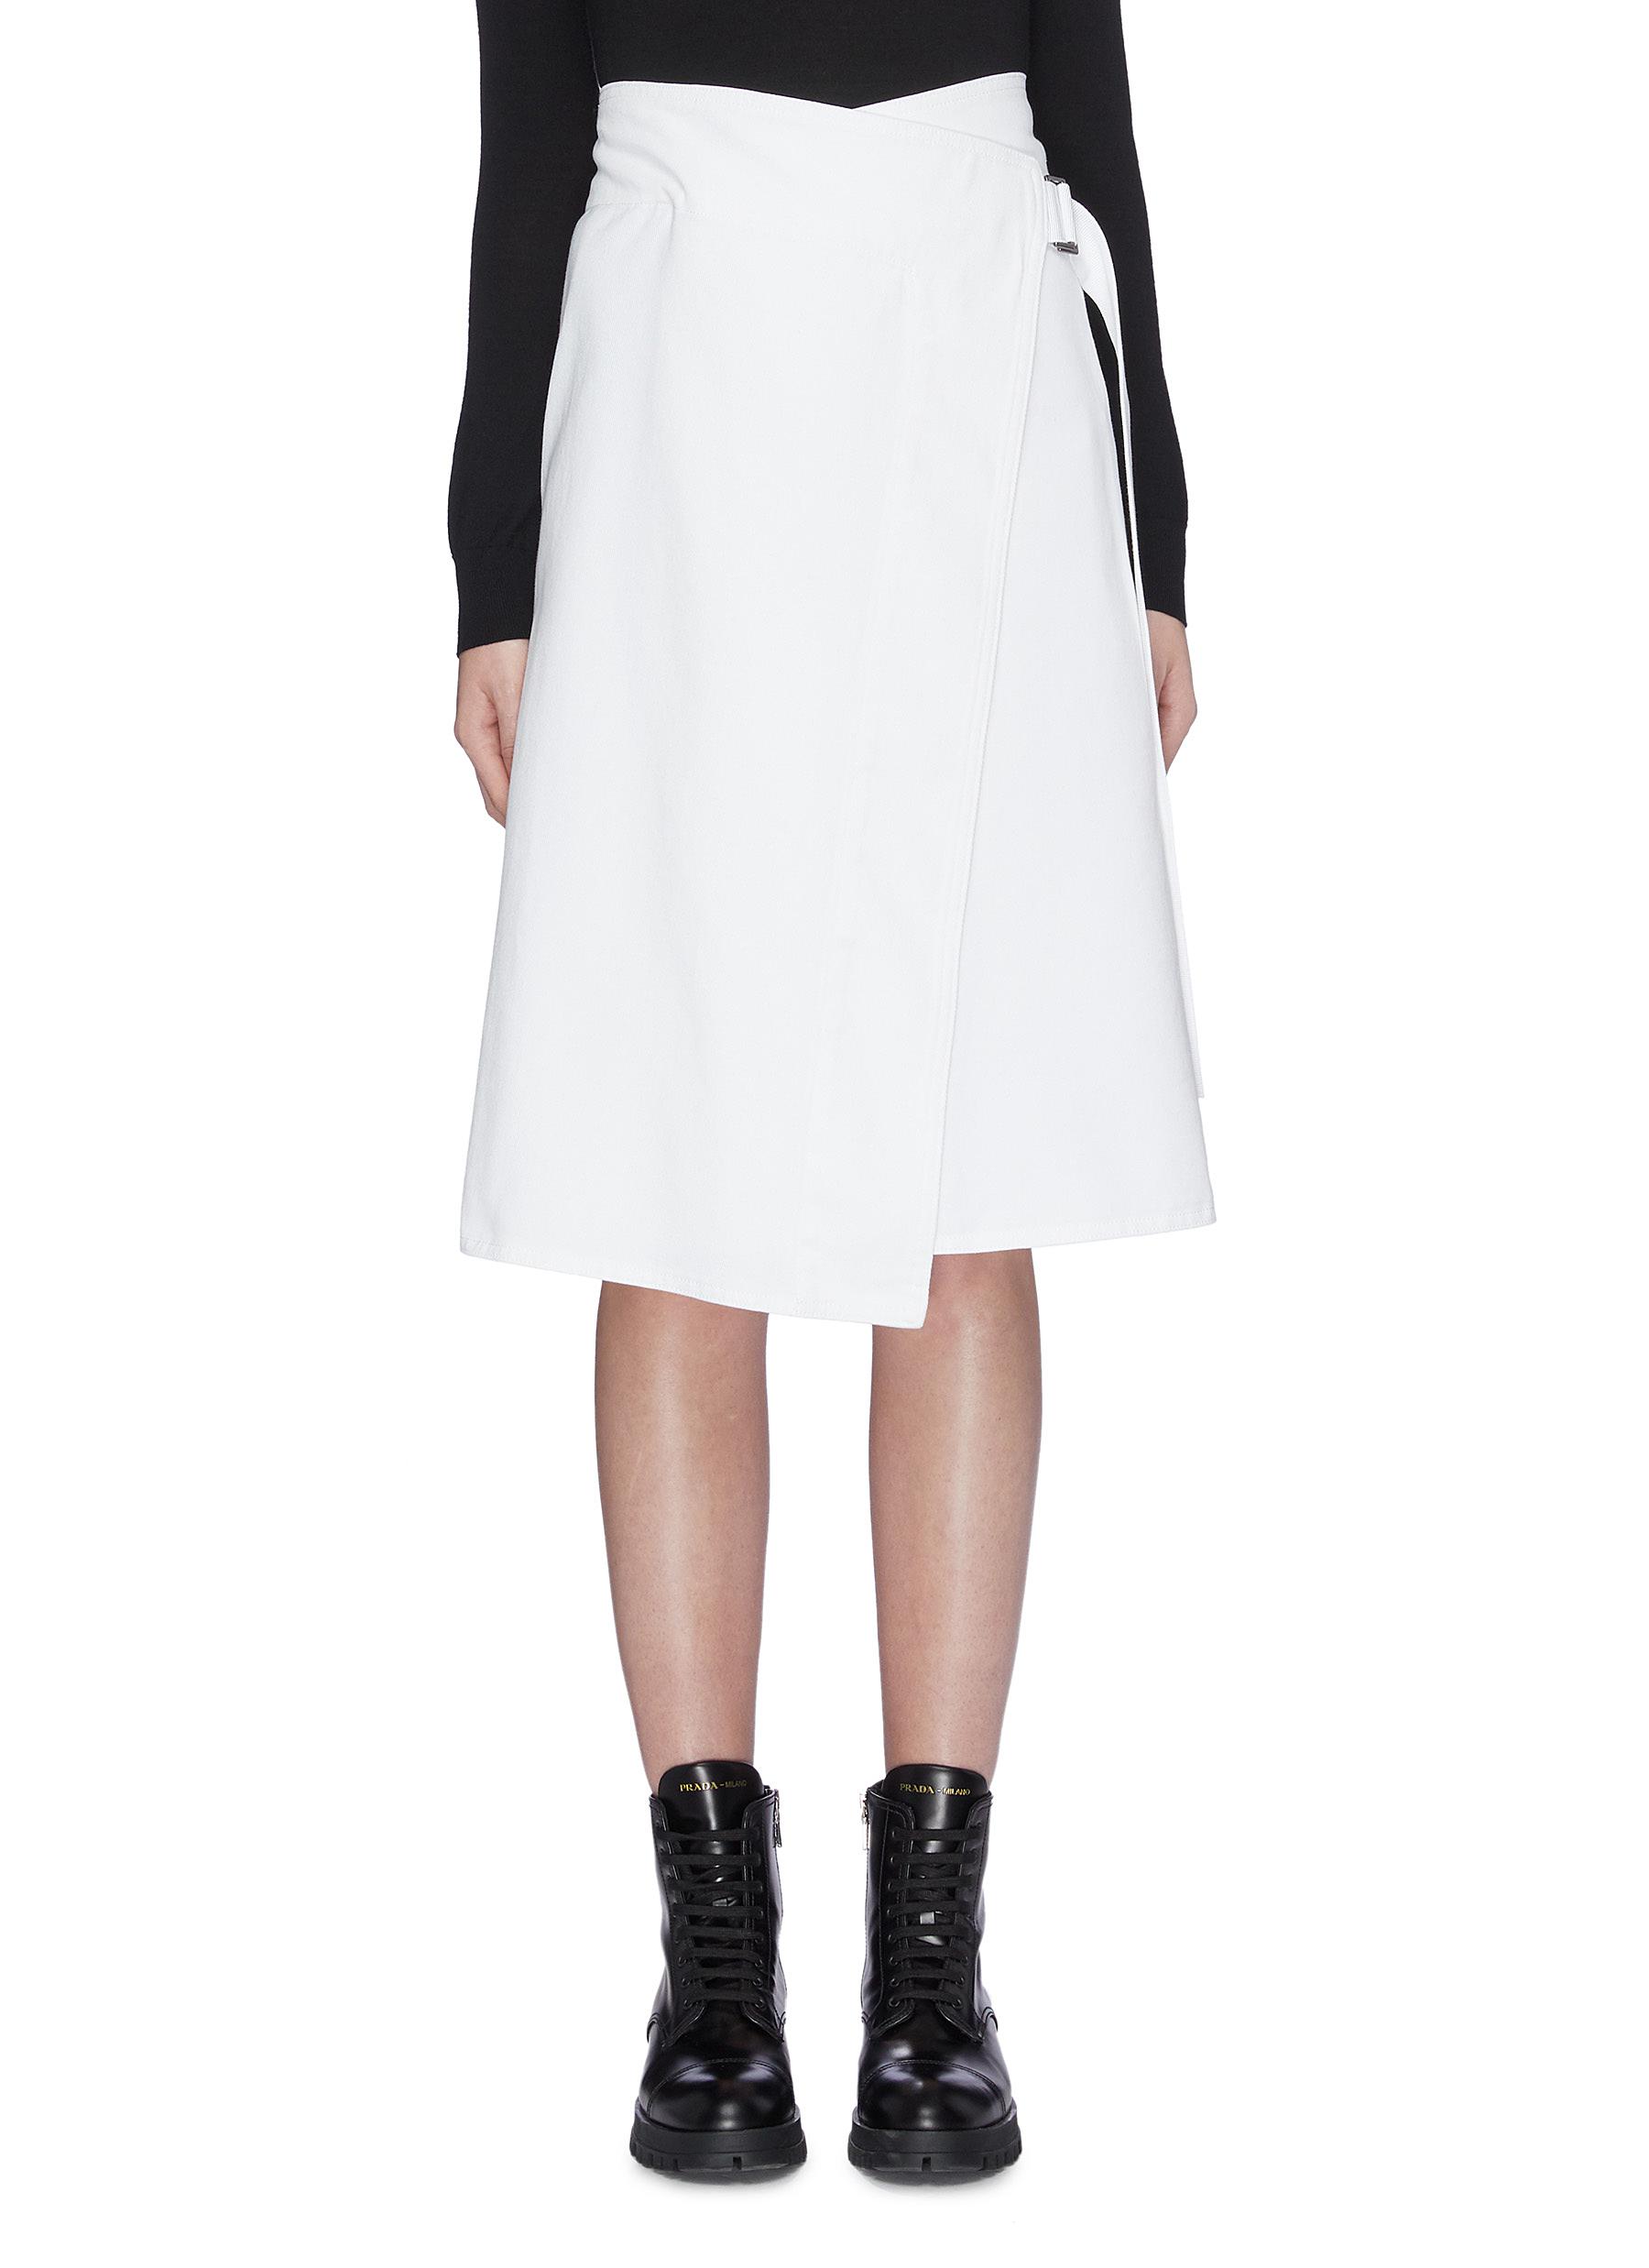 Buckled wrap skirt by Moncler